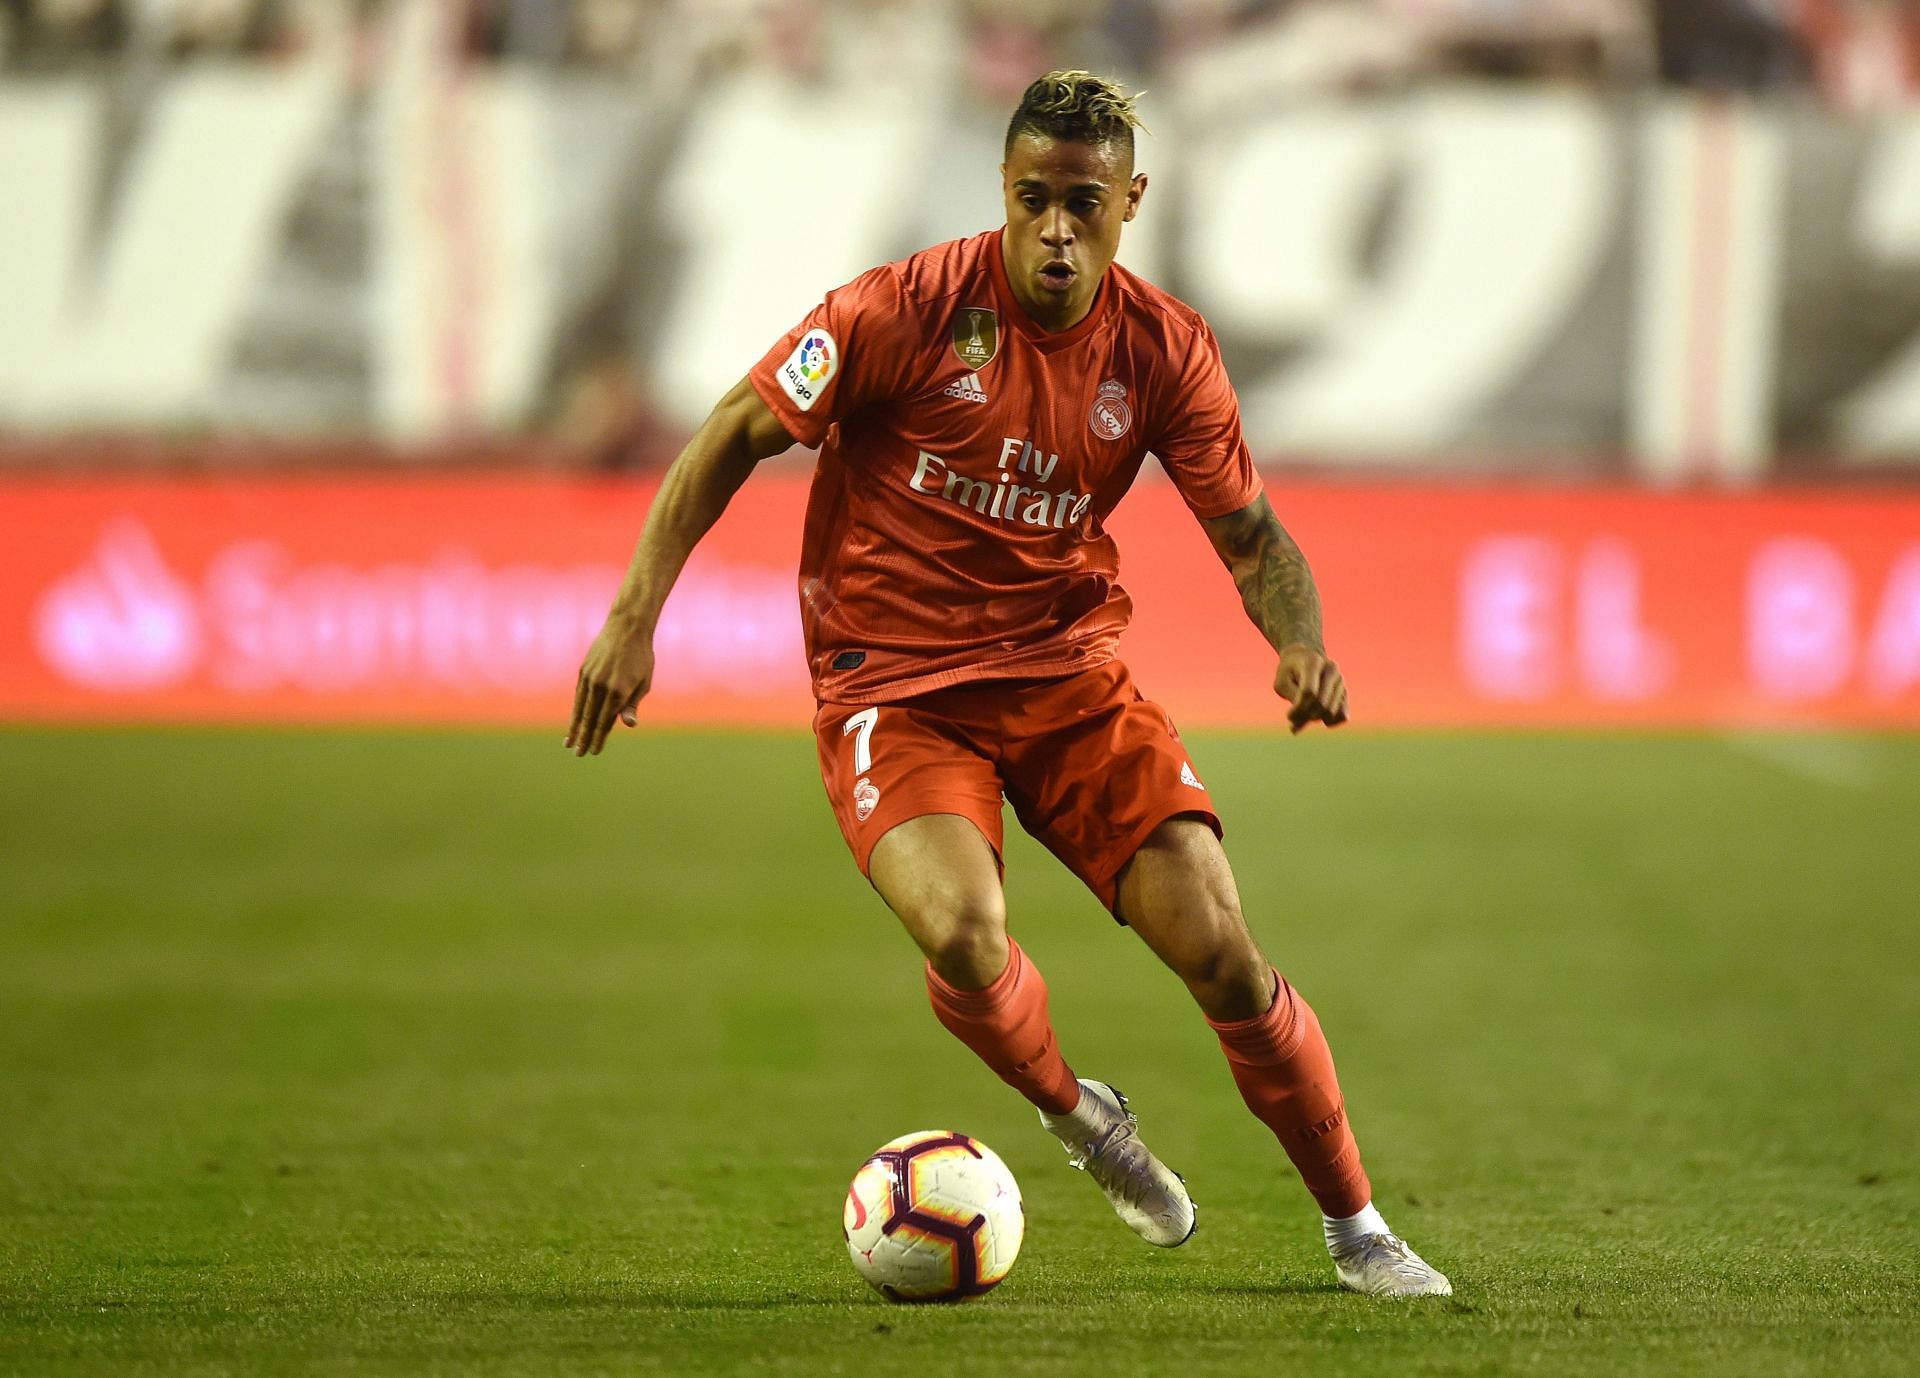 Sevilla have ended their interest in Mariano Diaz.